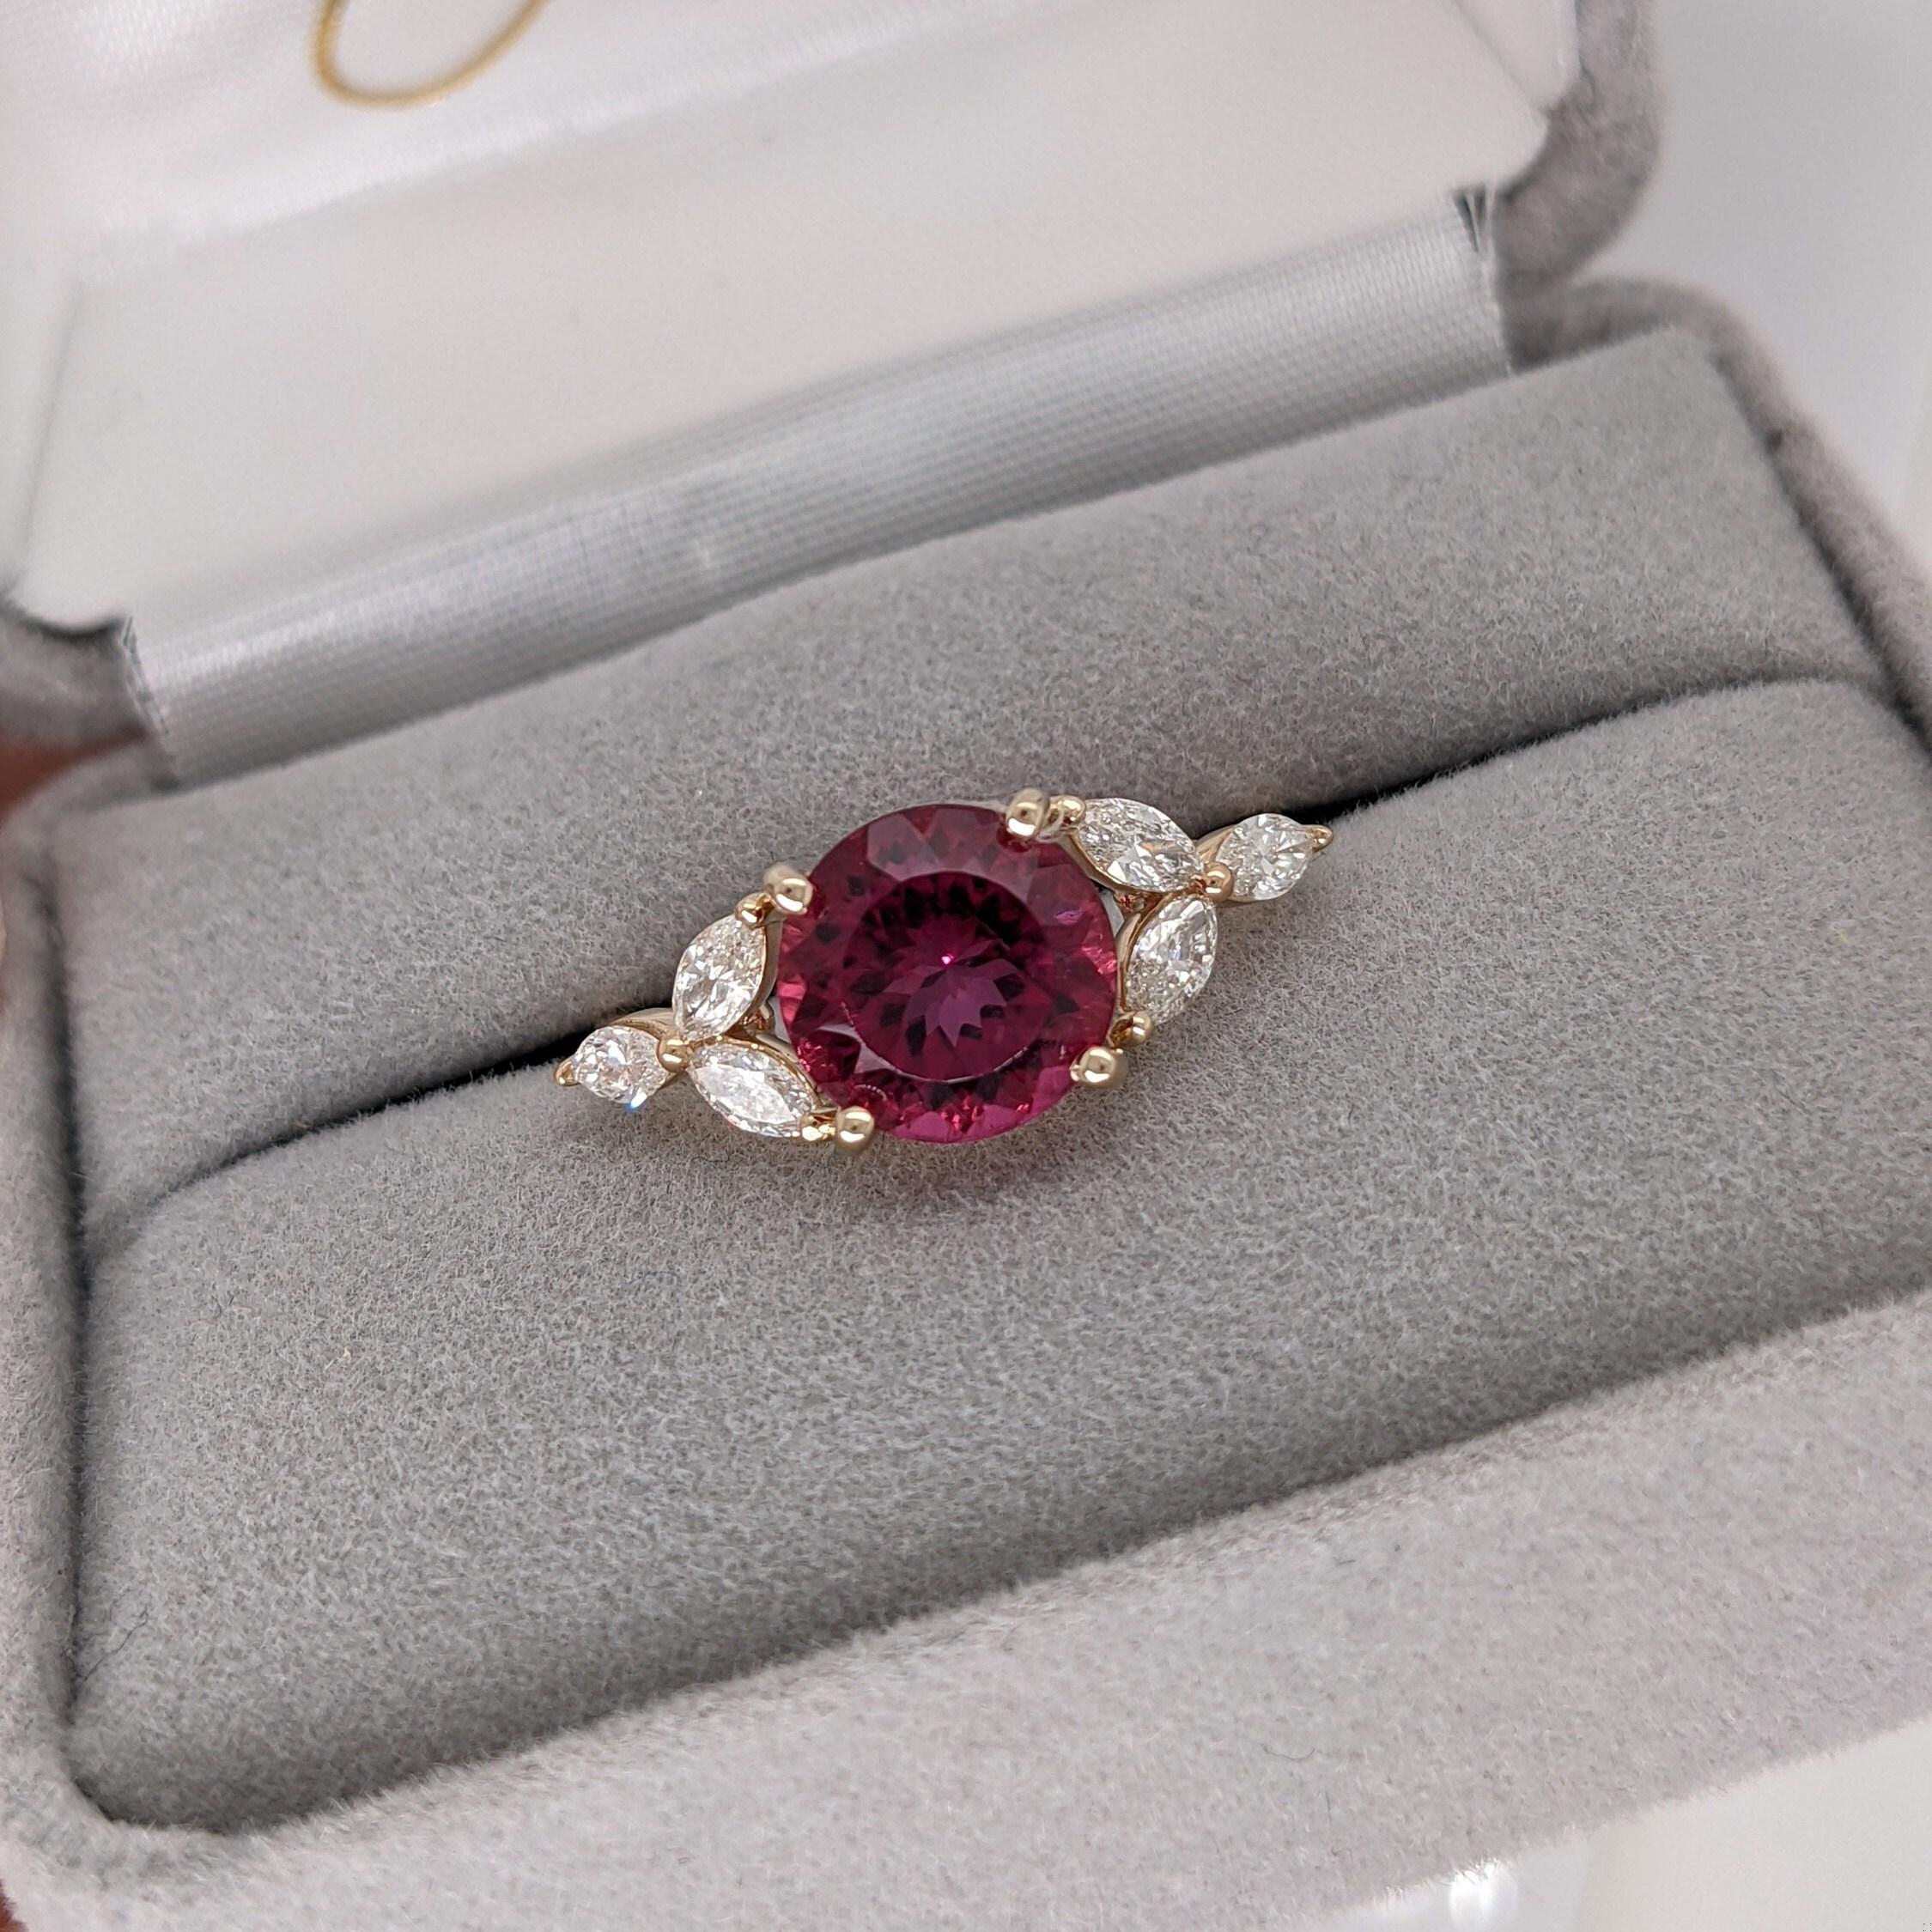 2ct Rubellite Tourmaline Ring w Earth Mined Diamonds in Solid 14k Gold Round 8mm For Sale 1